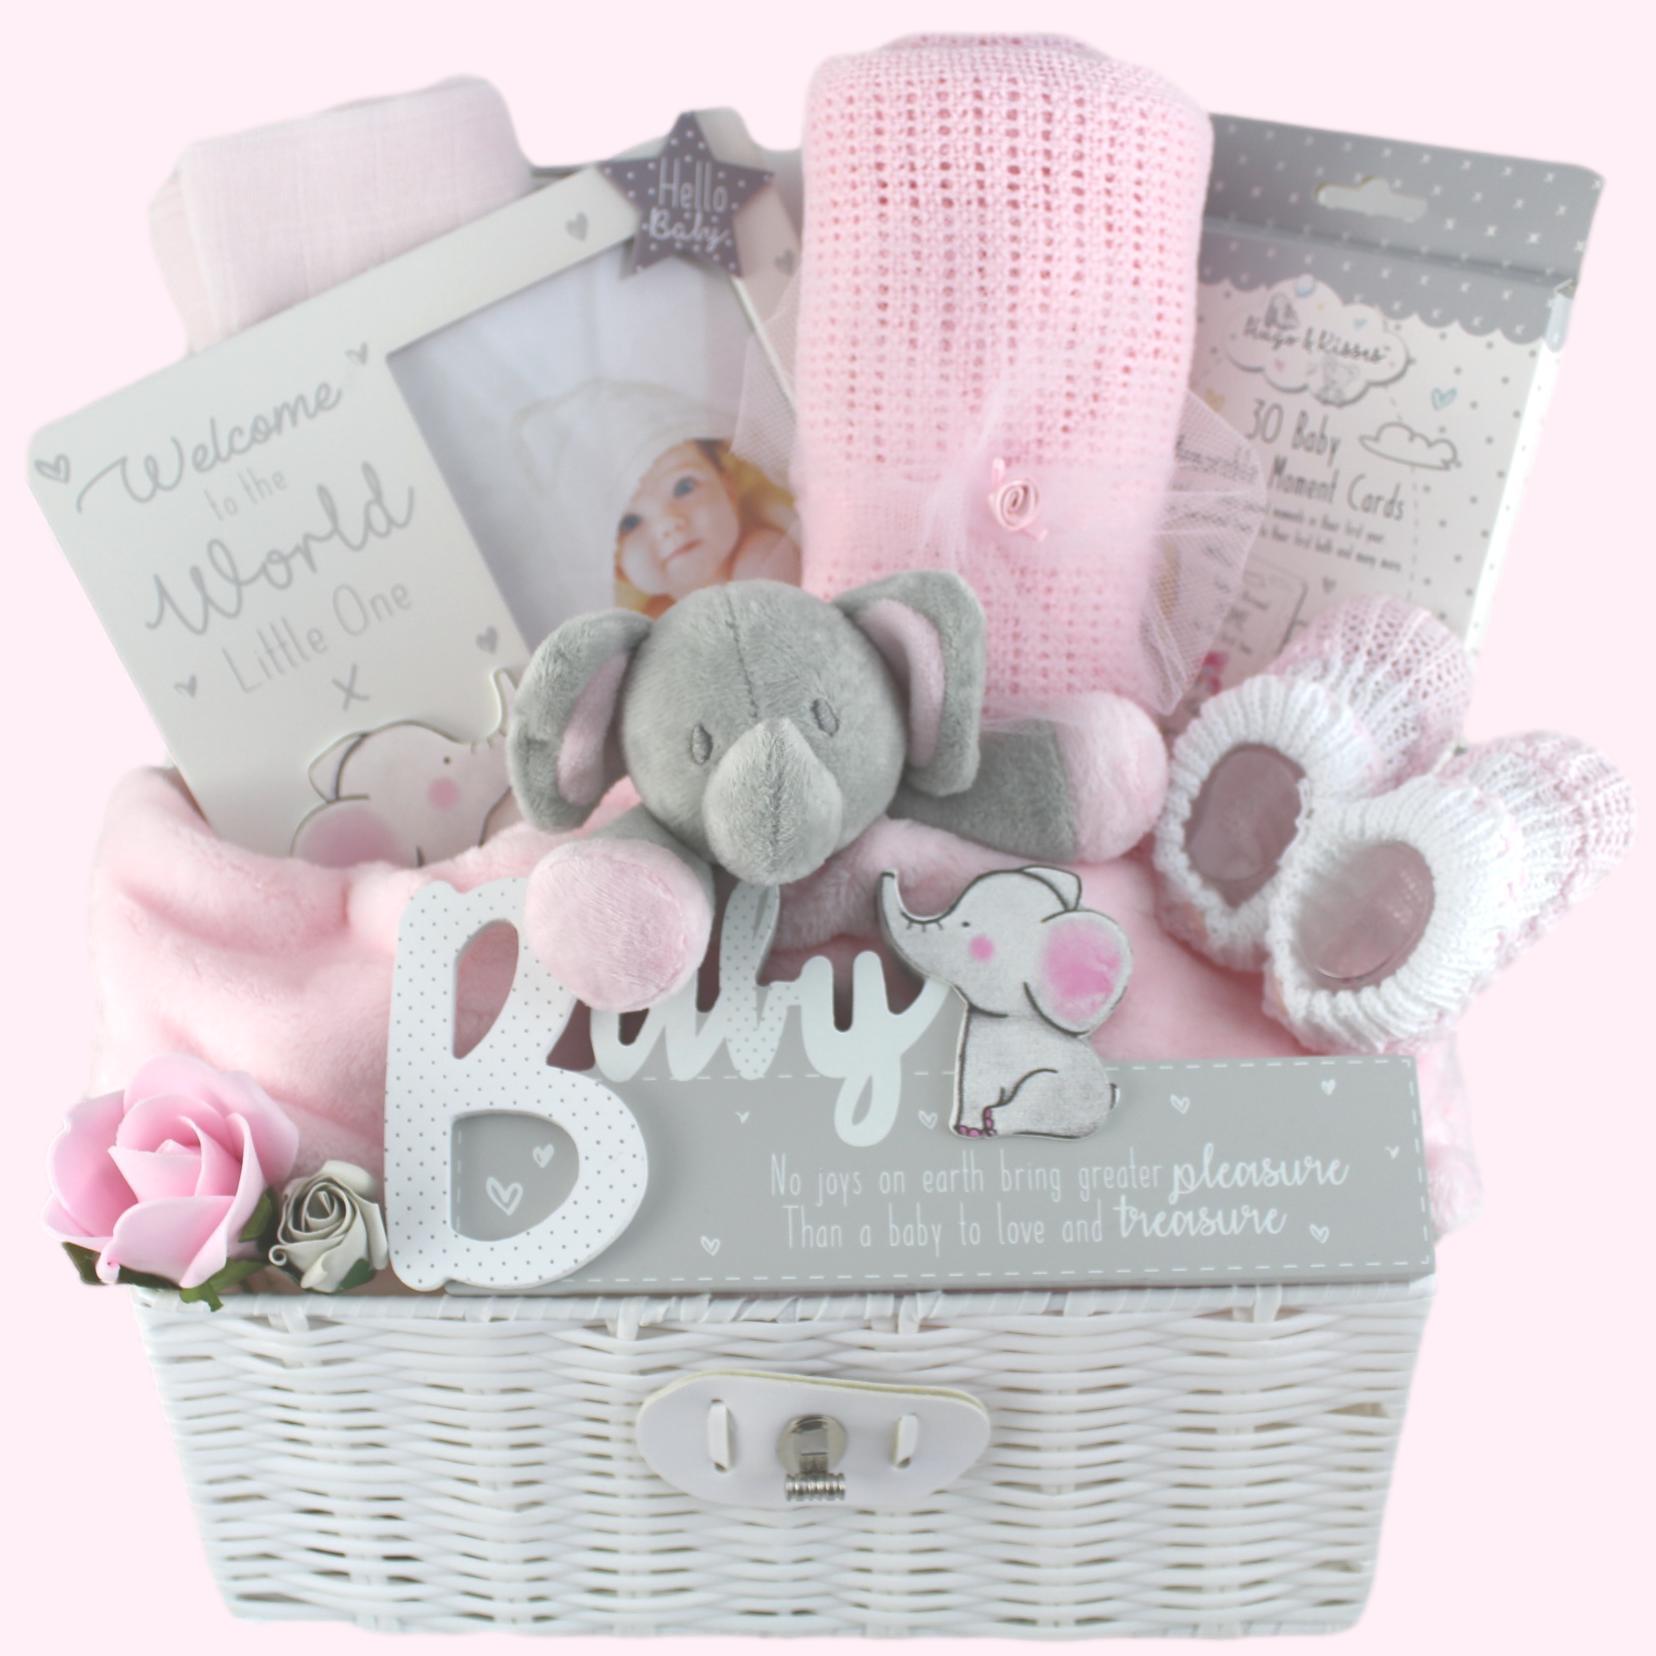 Welcome Baby Girl | Purpink Gifts Ltd | Reviews on Judge.me